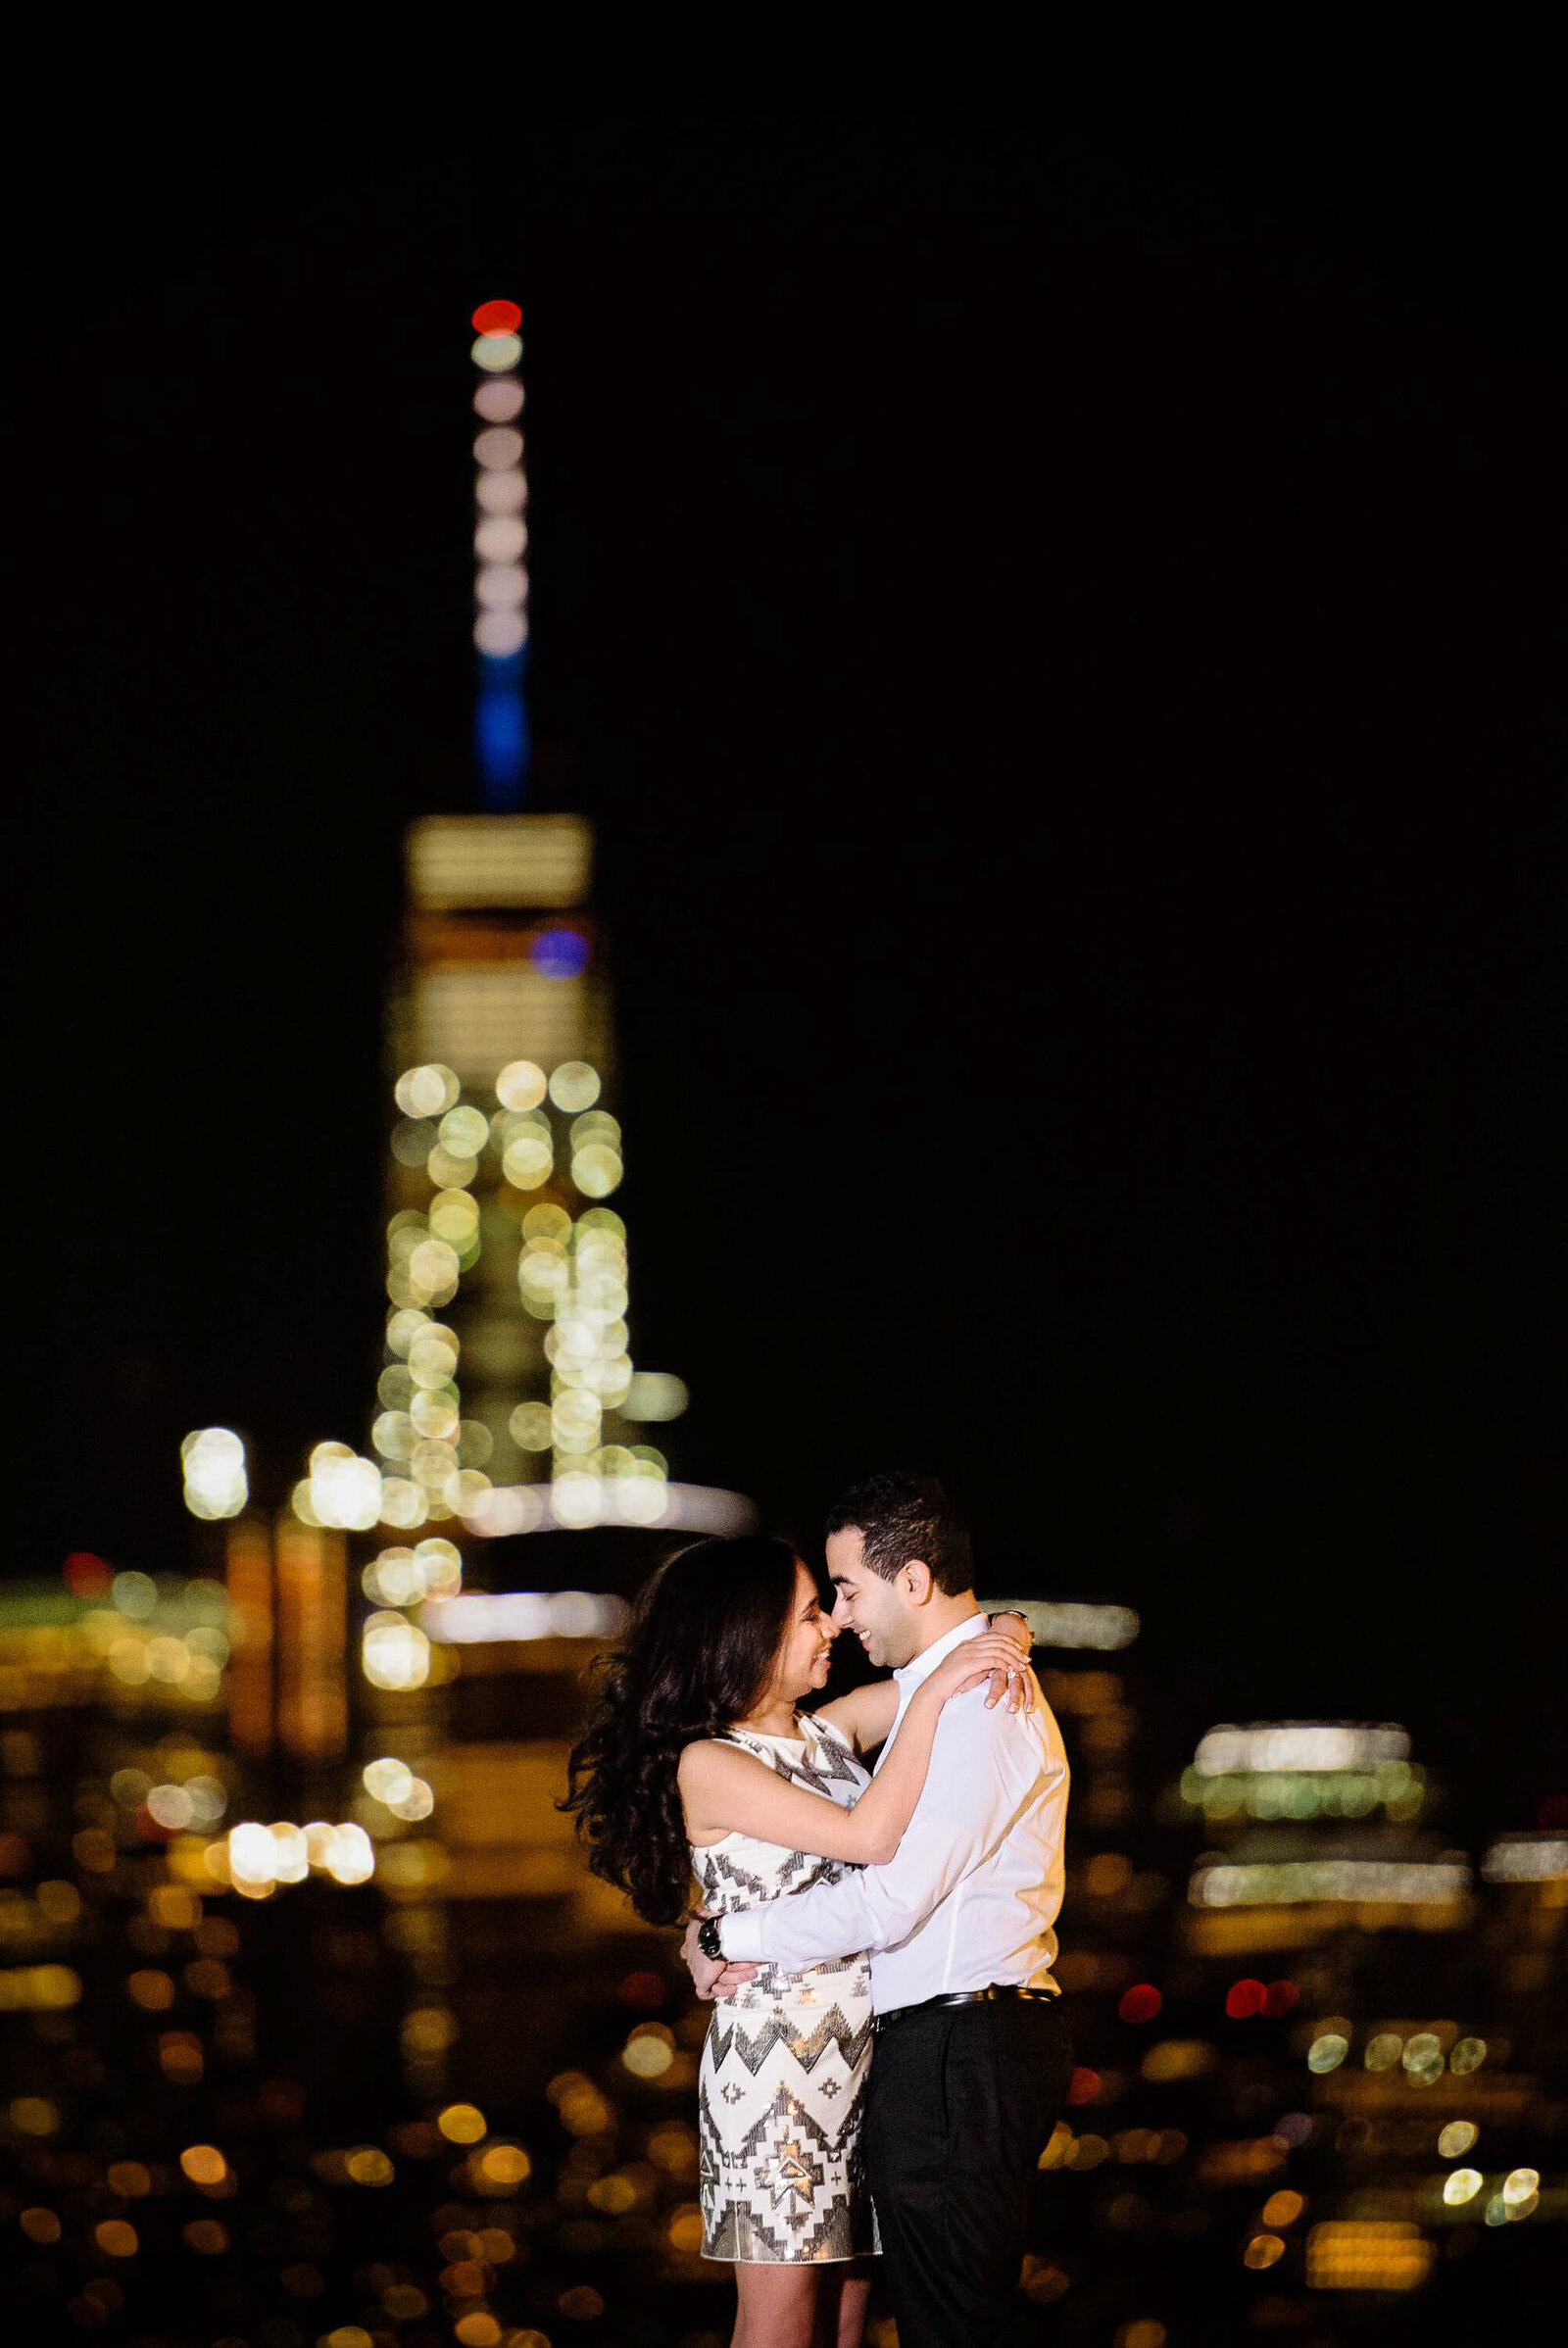 Capture your love story with Hoboken's waterfront views.